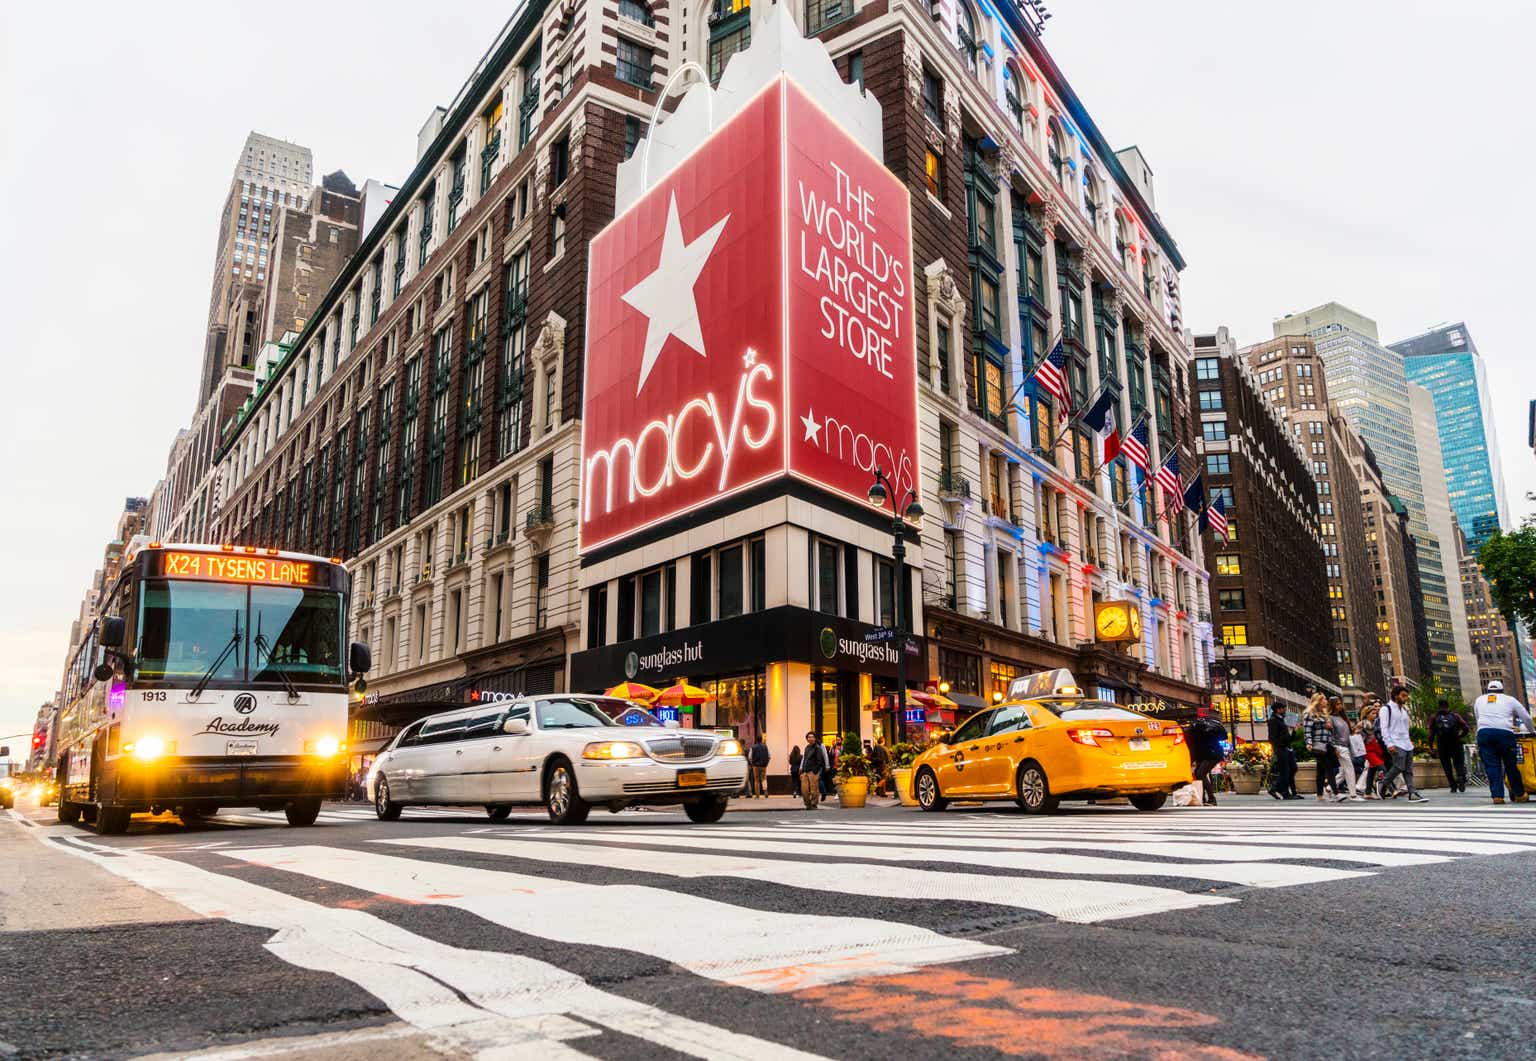 Macy's wants to take 150 of its stores upscale